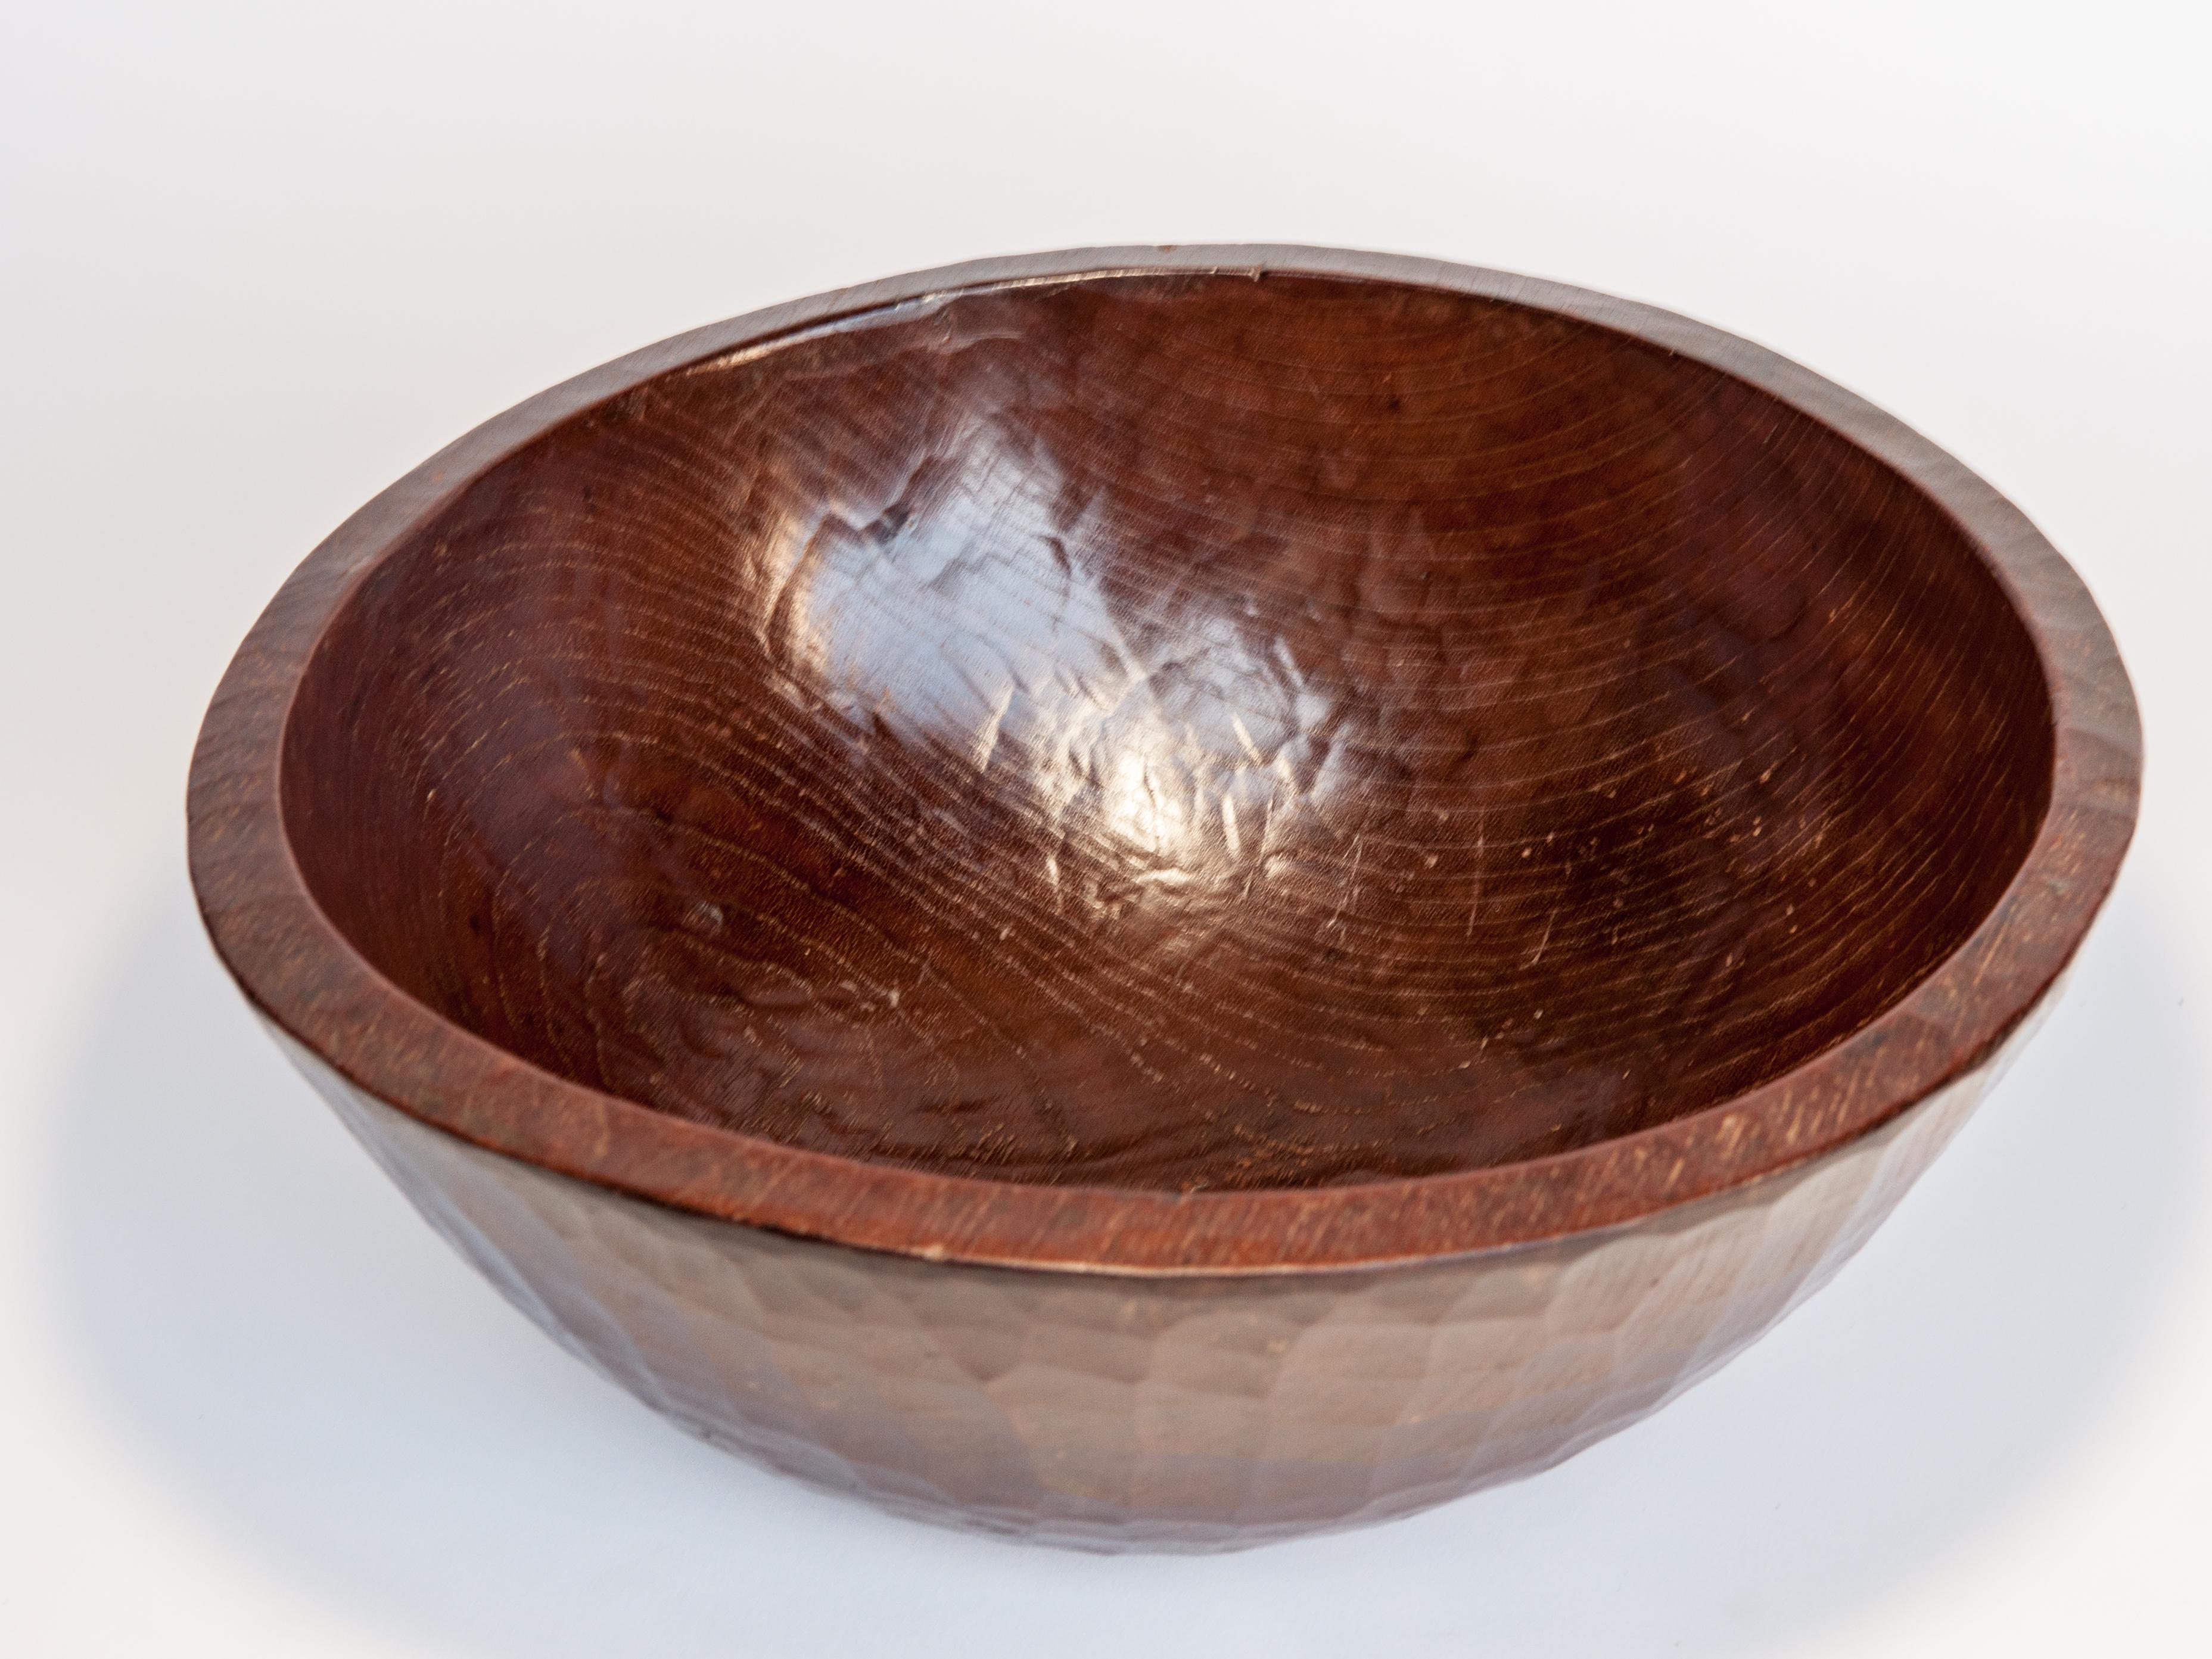 Hand-Crafted Old Tribal Wooden Bowl from the West Nepal Himal, Mid-20th Century